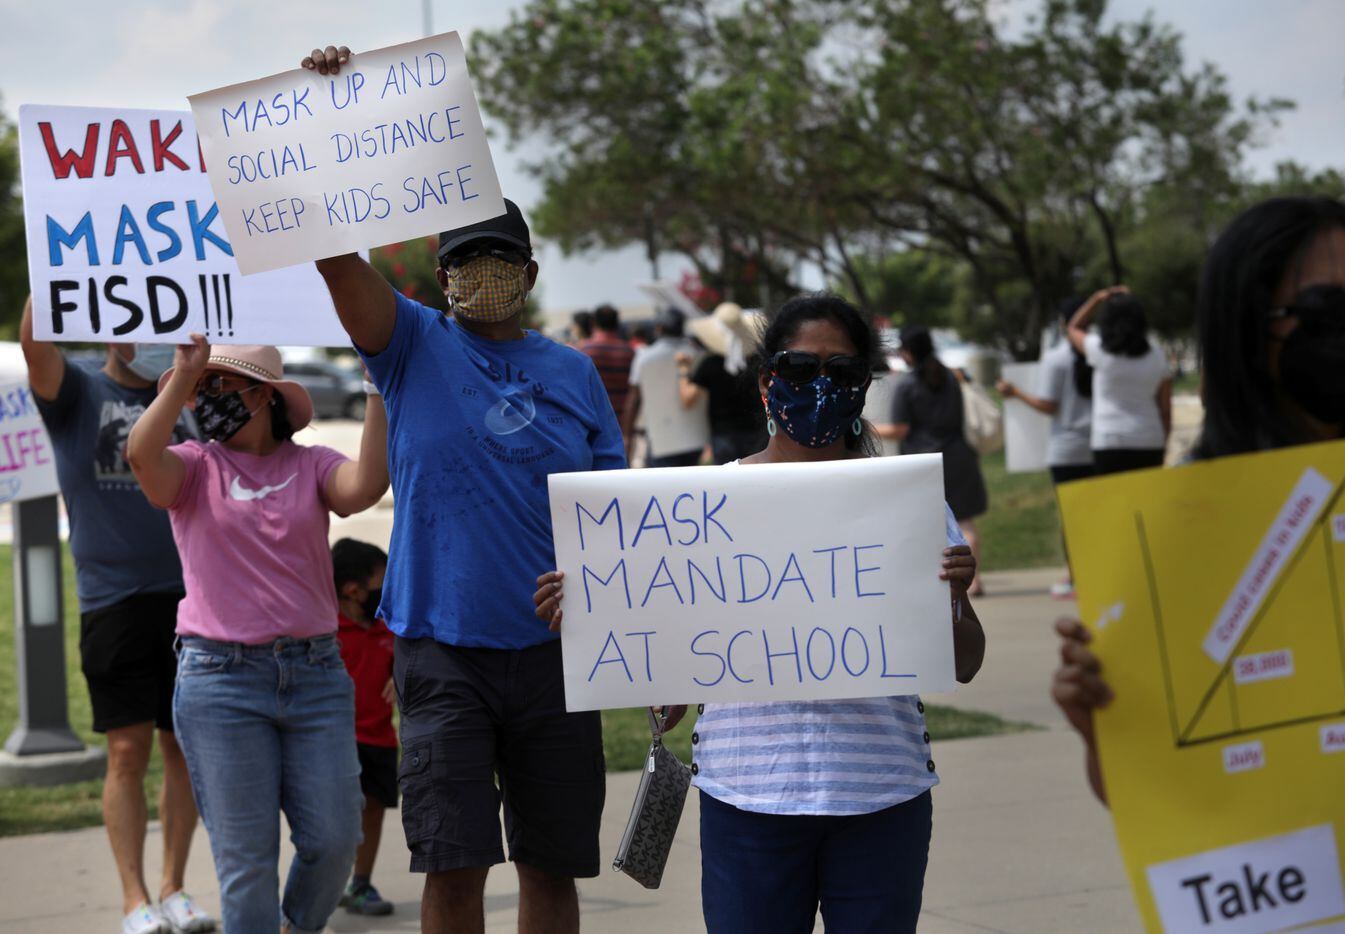 Community members seeking better COVID-19 protections gather during a protest at the Frisco ISD Administration Building in Frisco, TX, on Aug. 26, 2021.  (Jason Janik/Special Contributor)